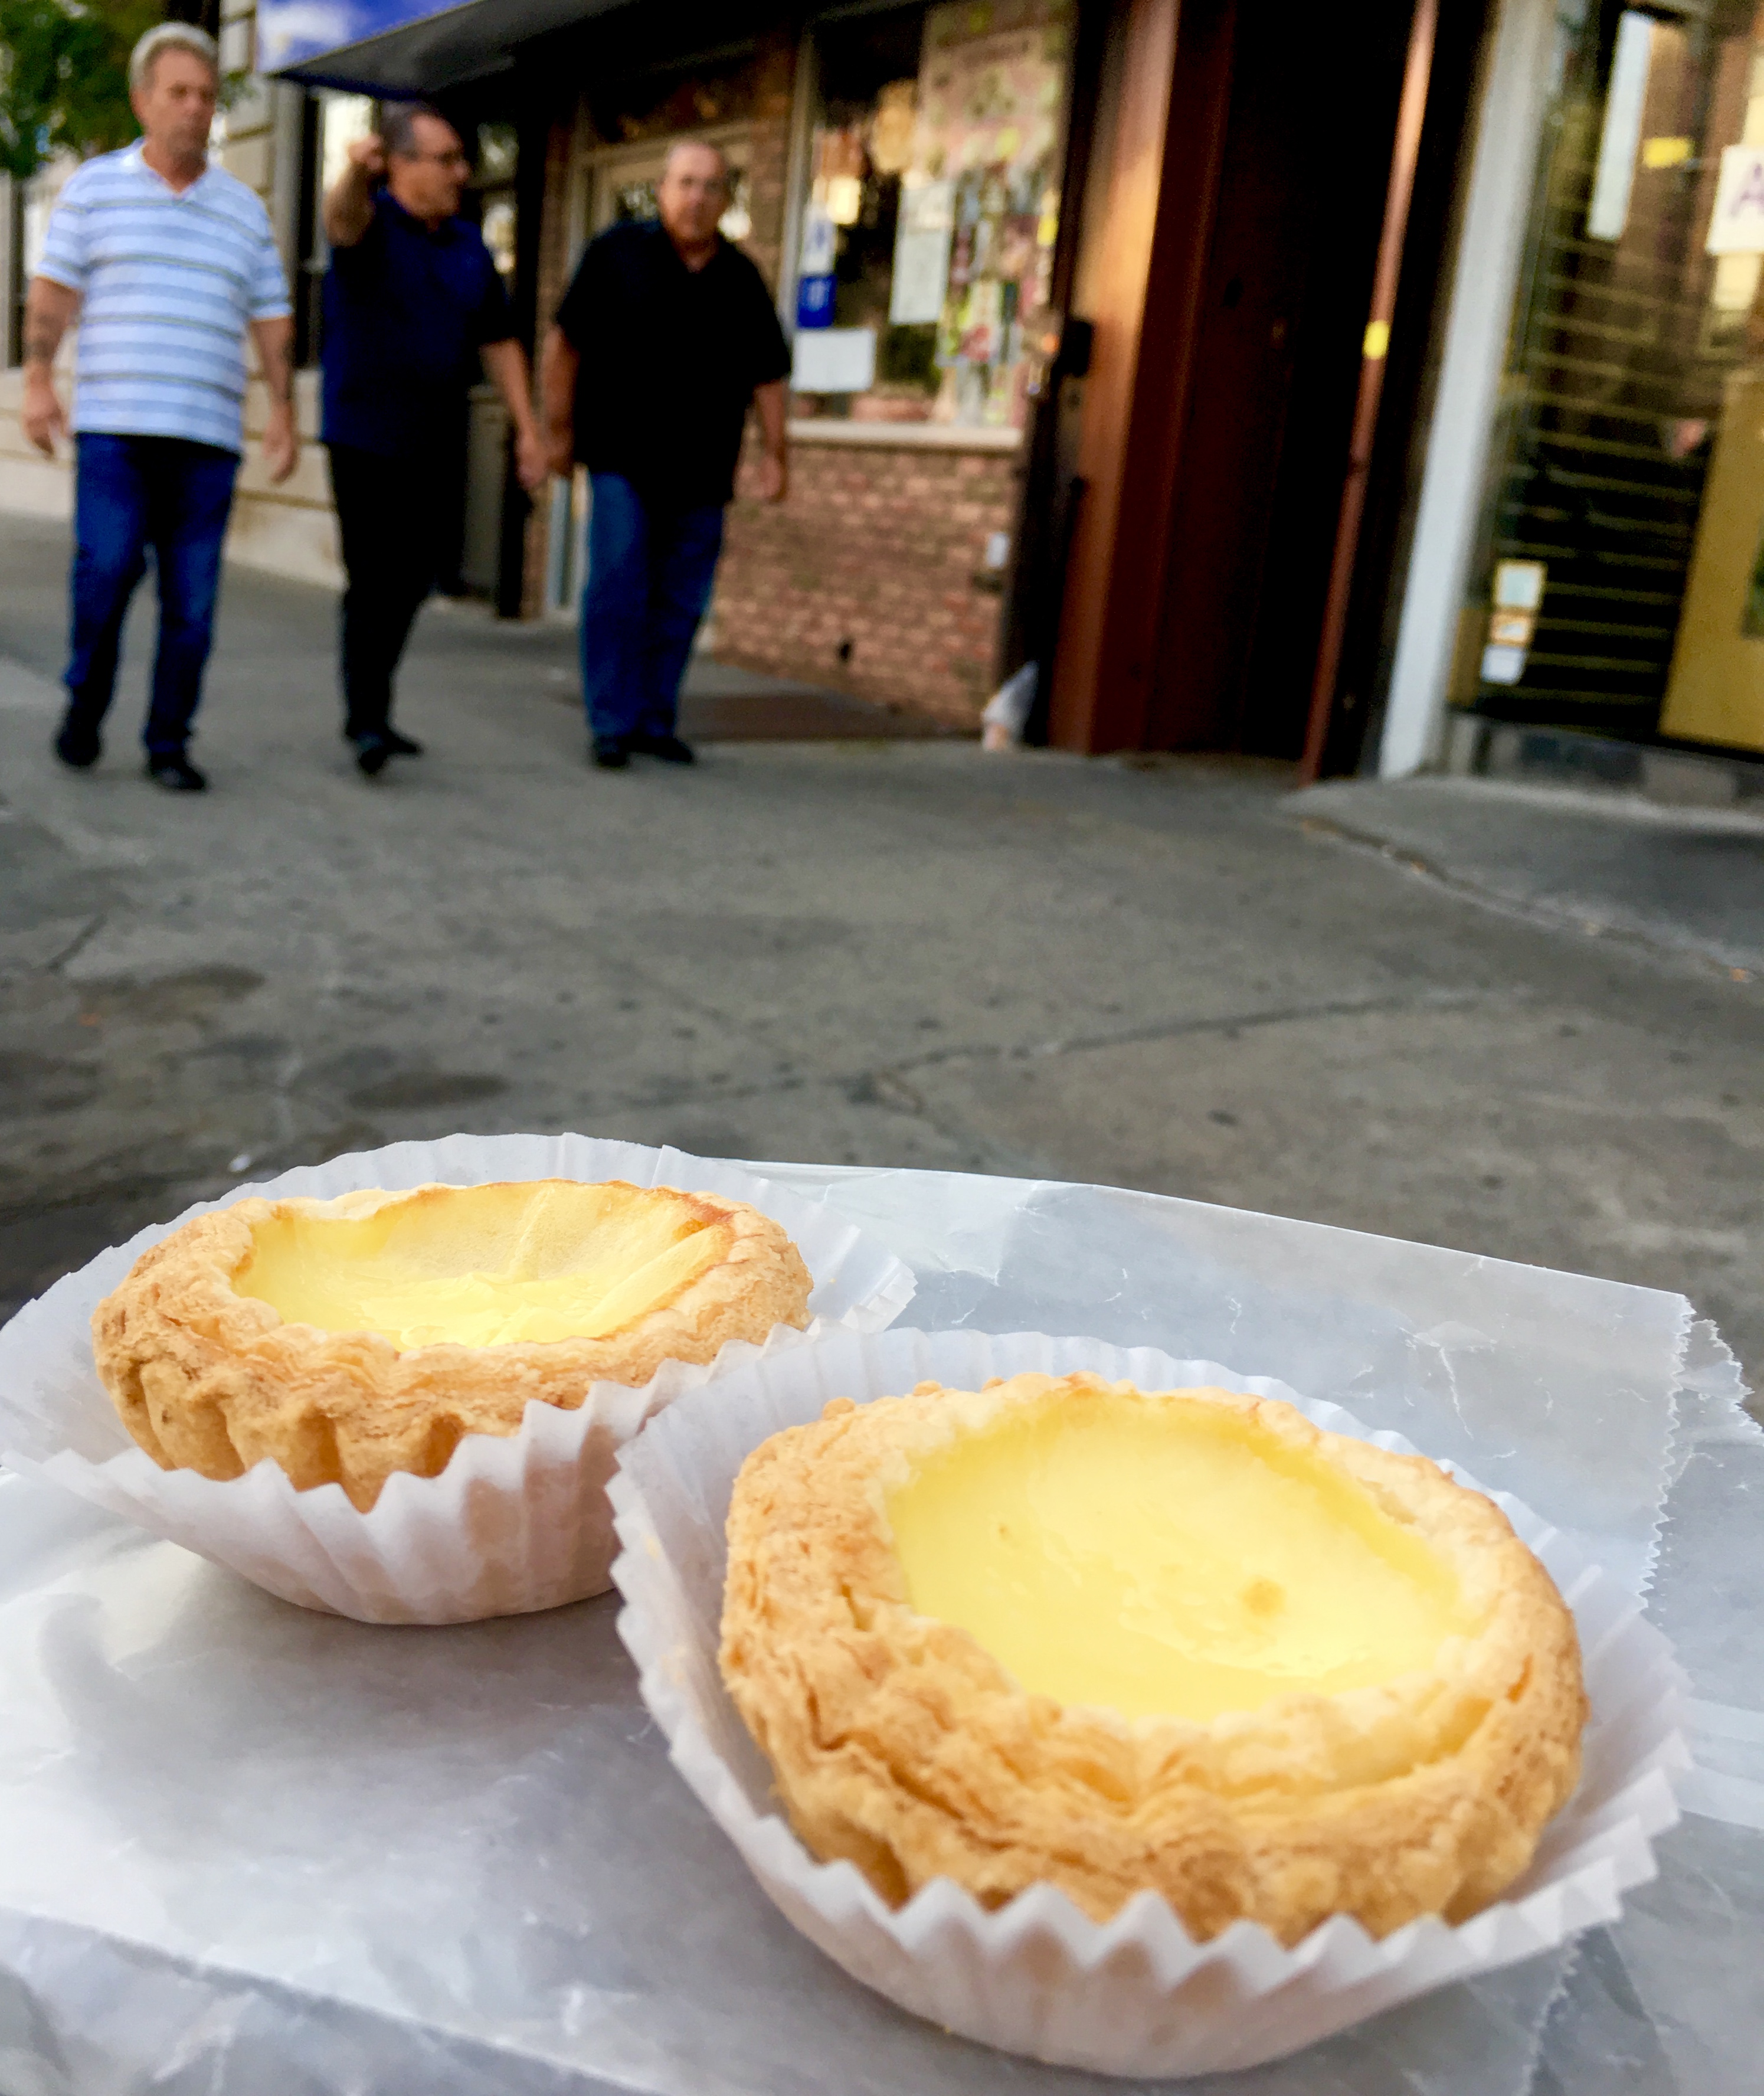 These egg custard tarts came from IBakery 18 Inc., which is partly visible in the backdrop of this picture. Eagle photo by Lore Croghan